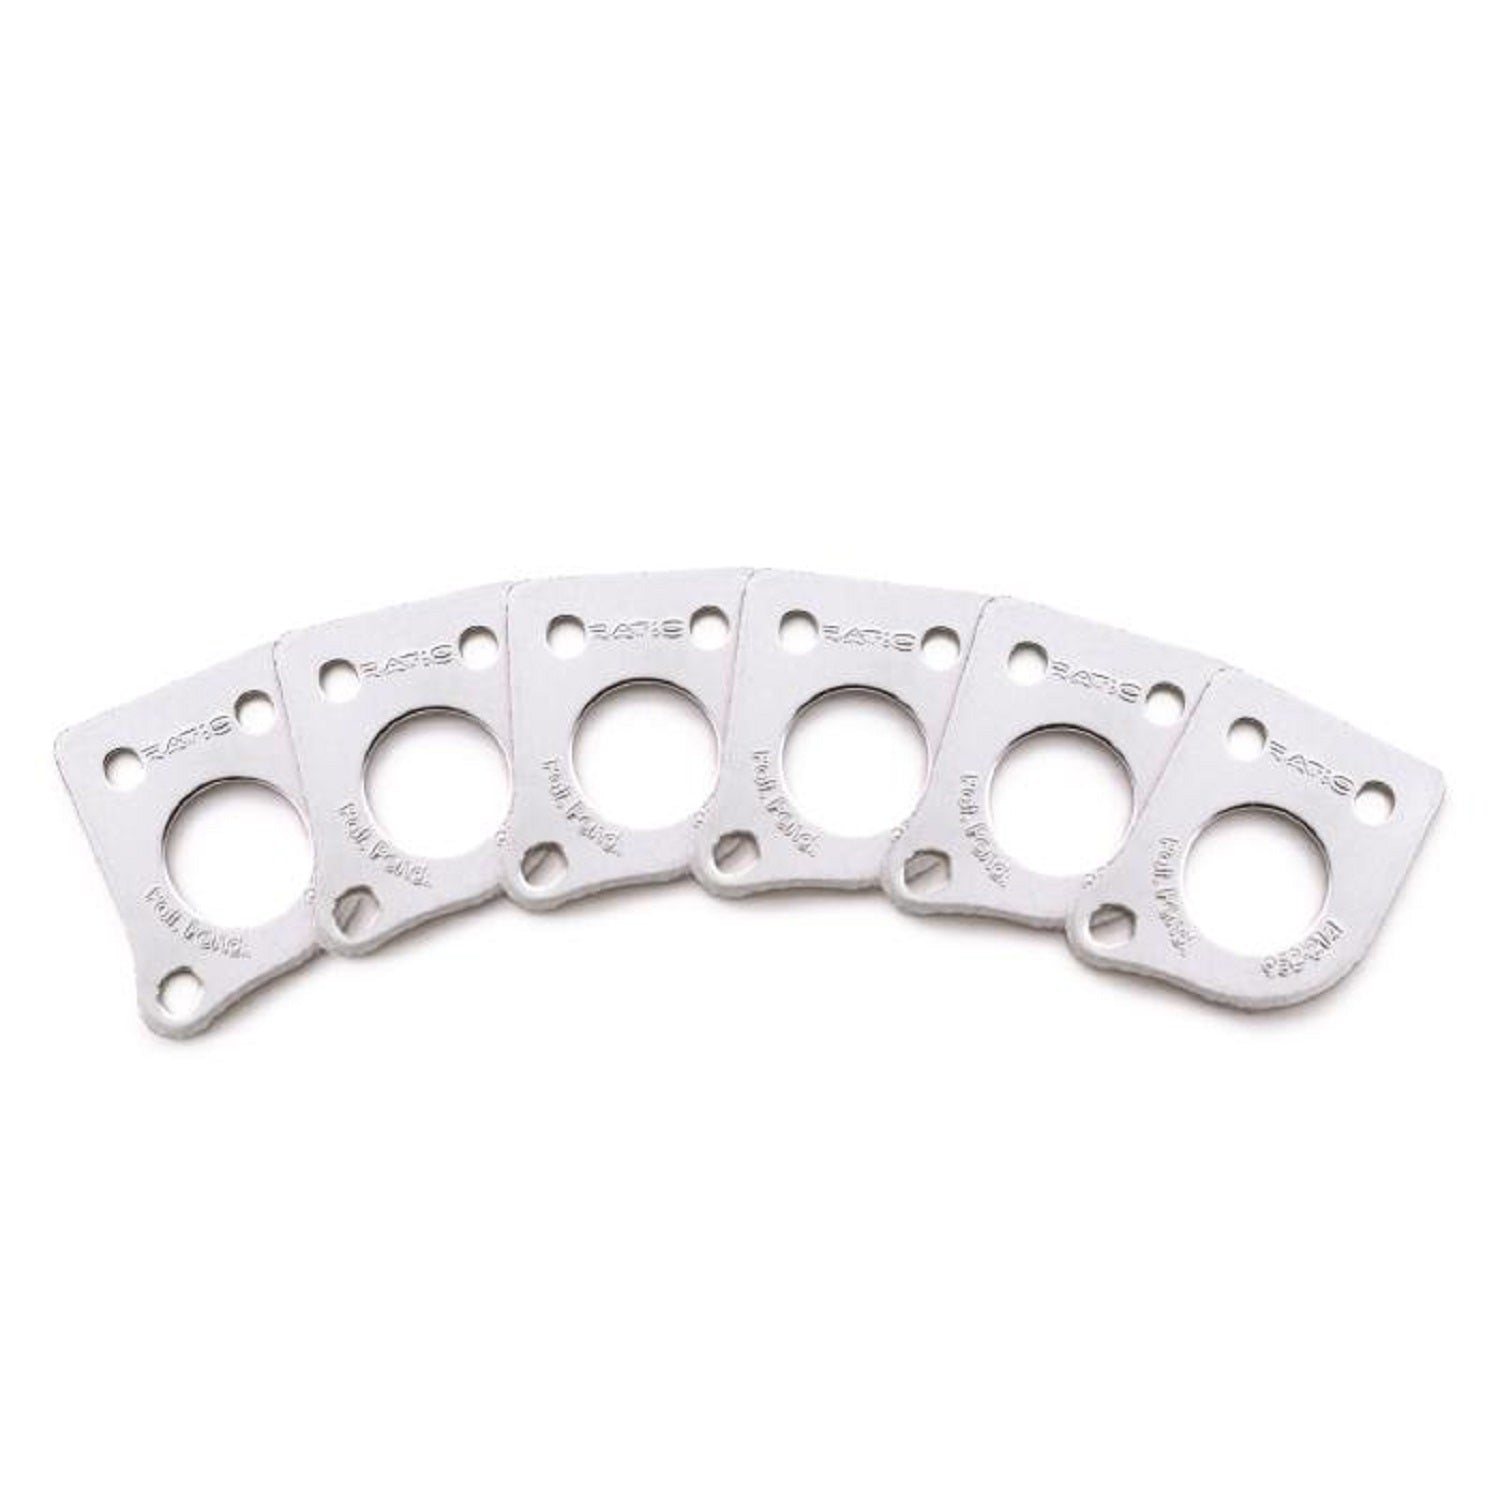 InvisoMatch Plates for Ratio Tuners, 45 degree Screw Hole (set of 6) (Select Finish) - Graph Tech Guitar Labs Ltd.